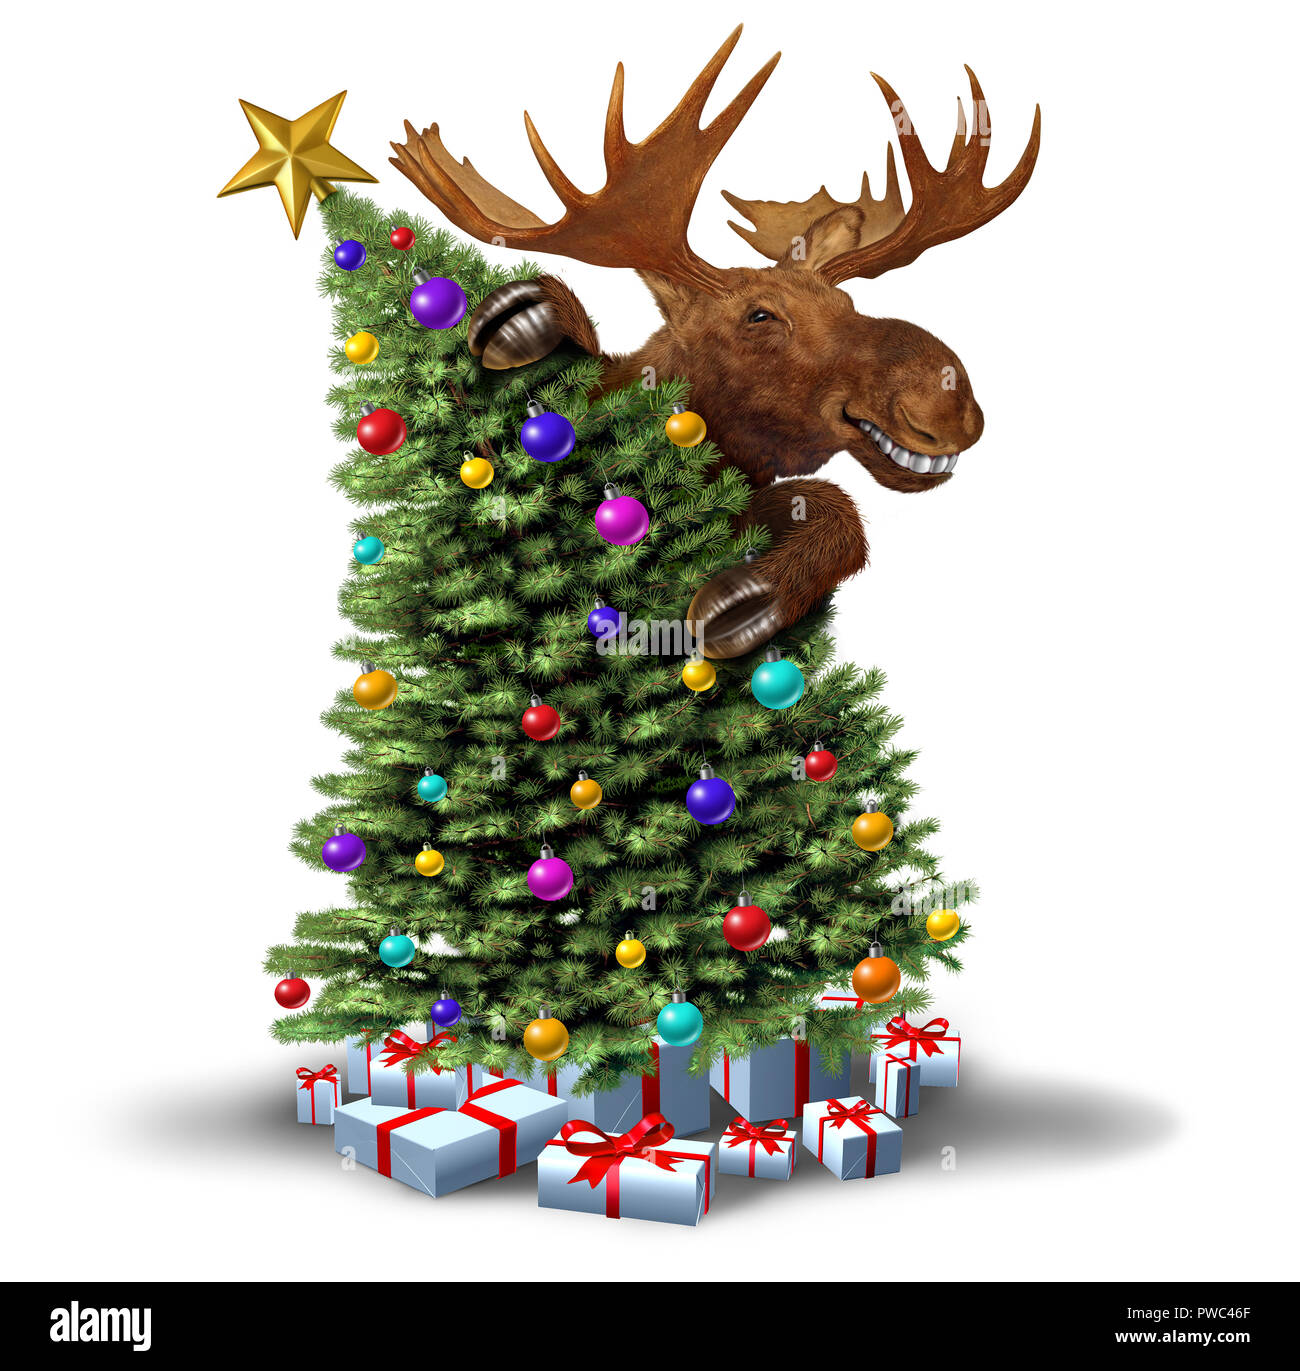 Funny moose decorating a Christmas tree as a winter holiday ...